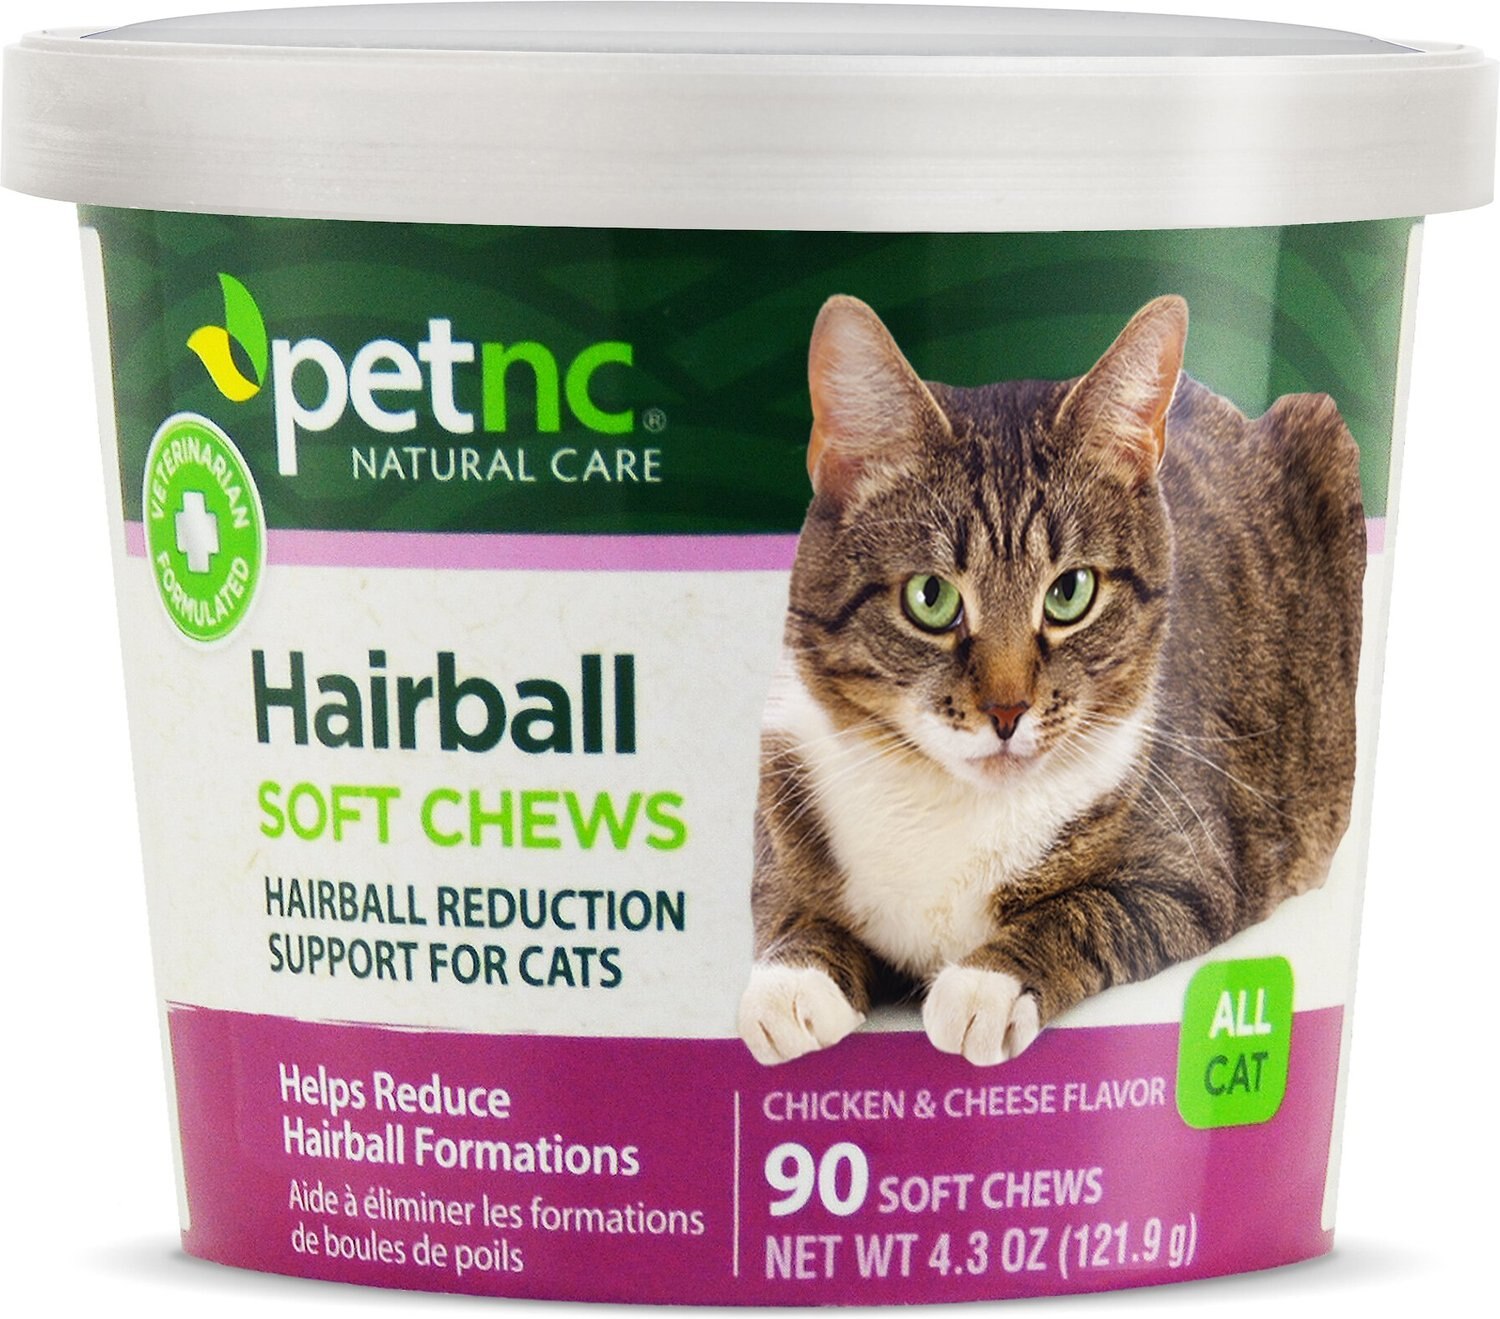 PETNC NATURAL CARE Hairball Reduction Cat Soft Chews, 90 count